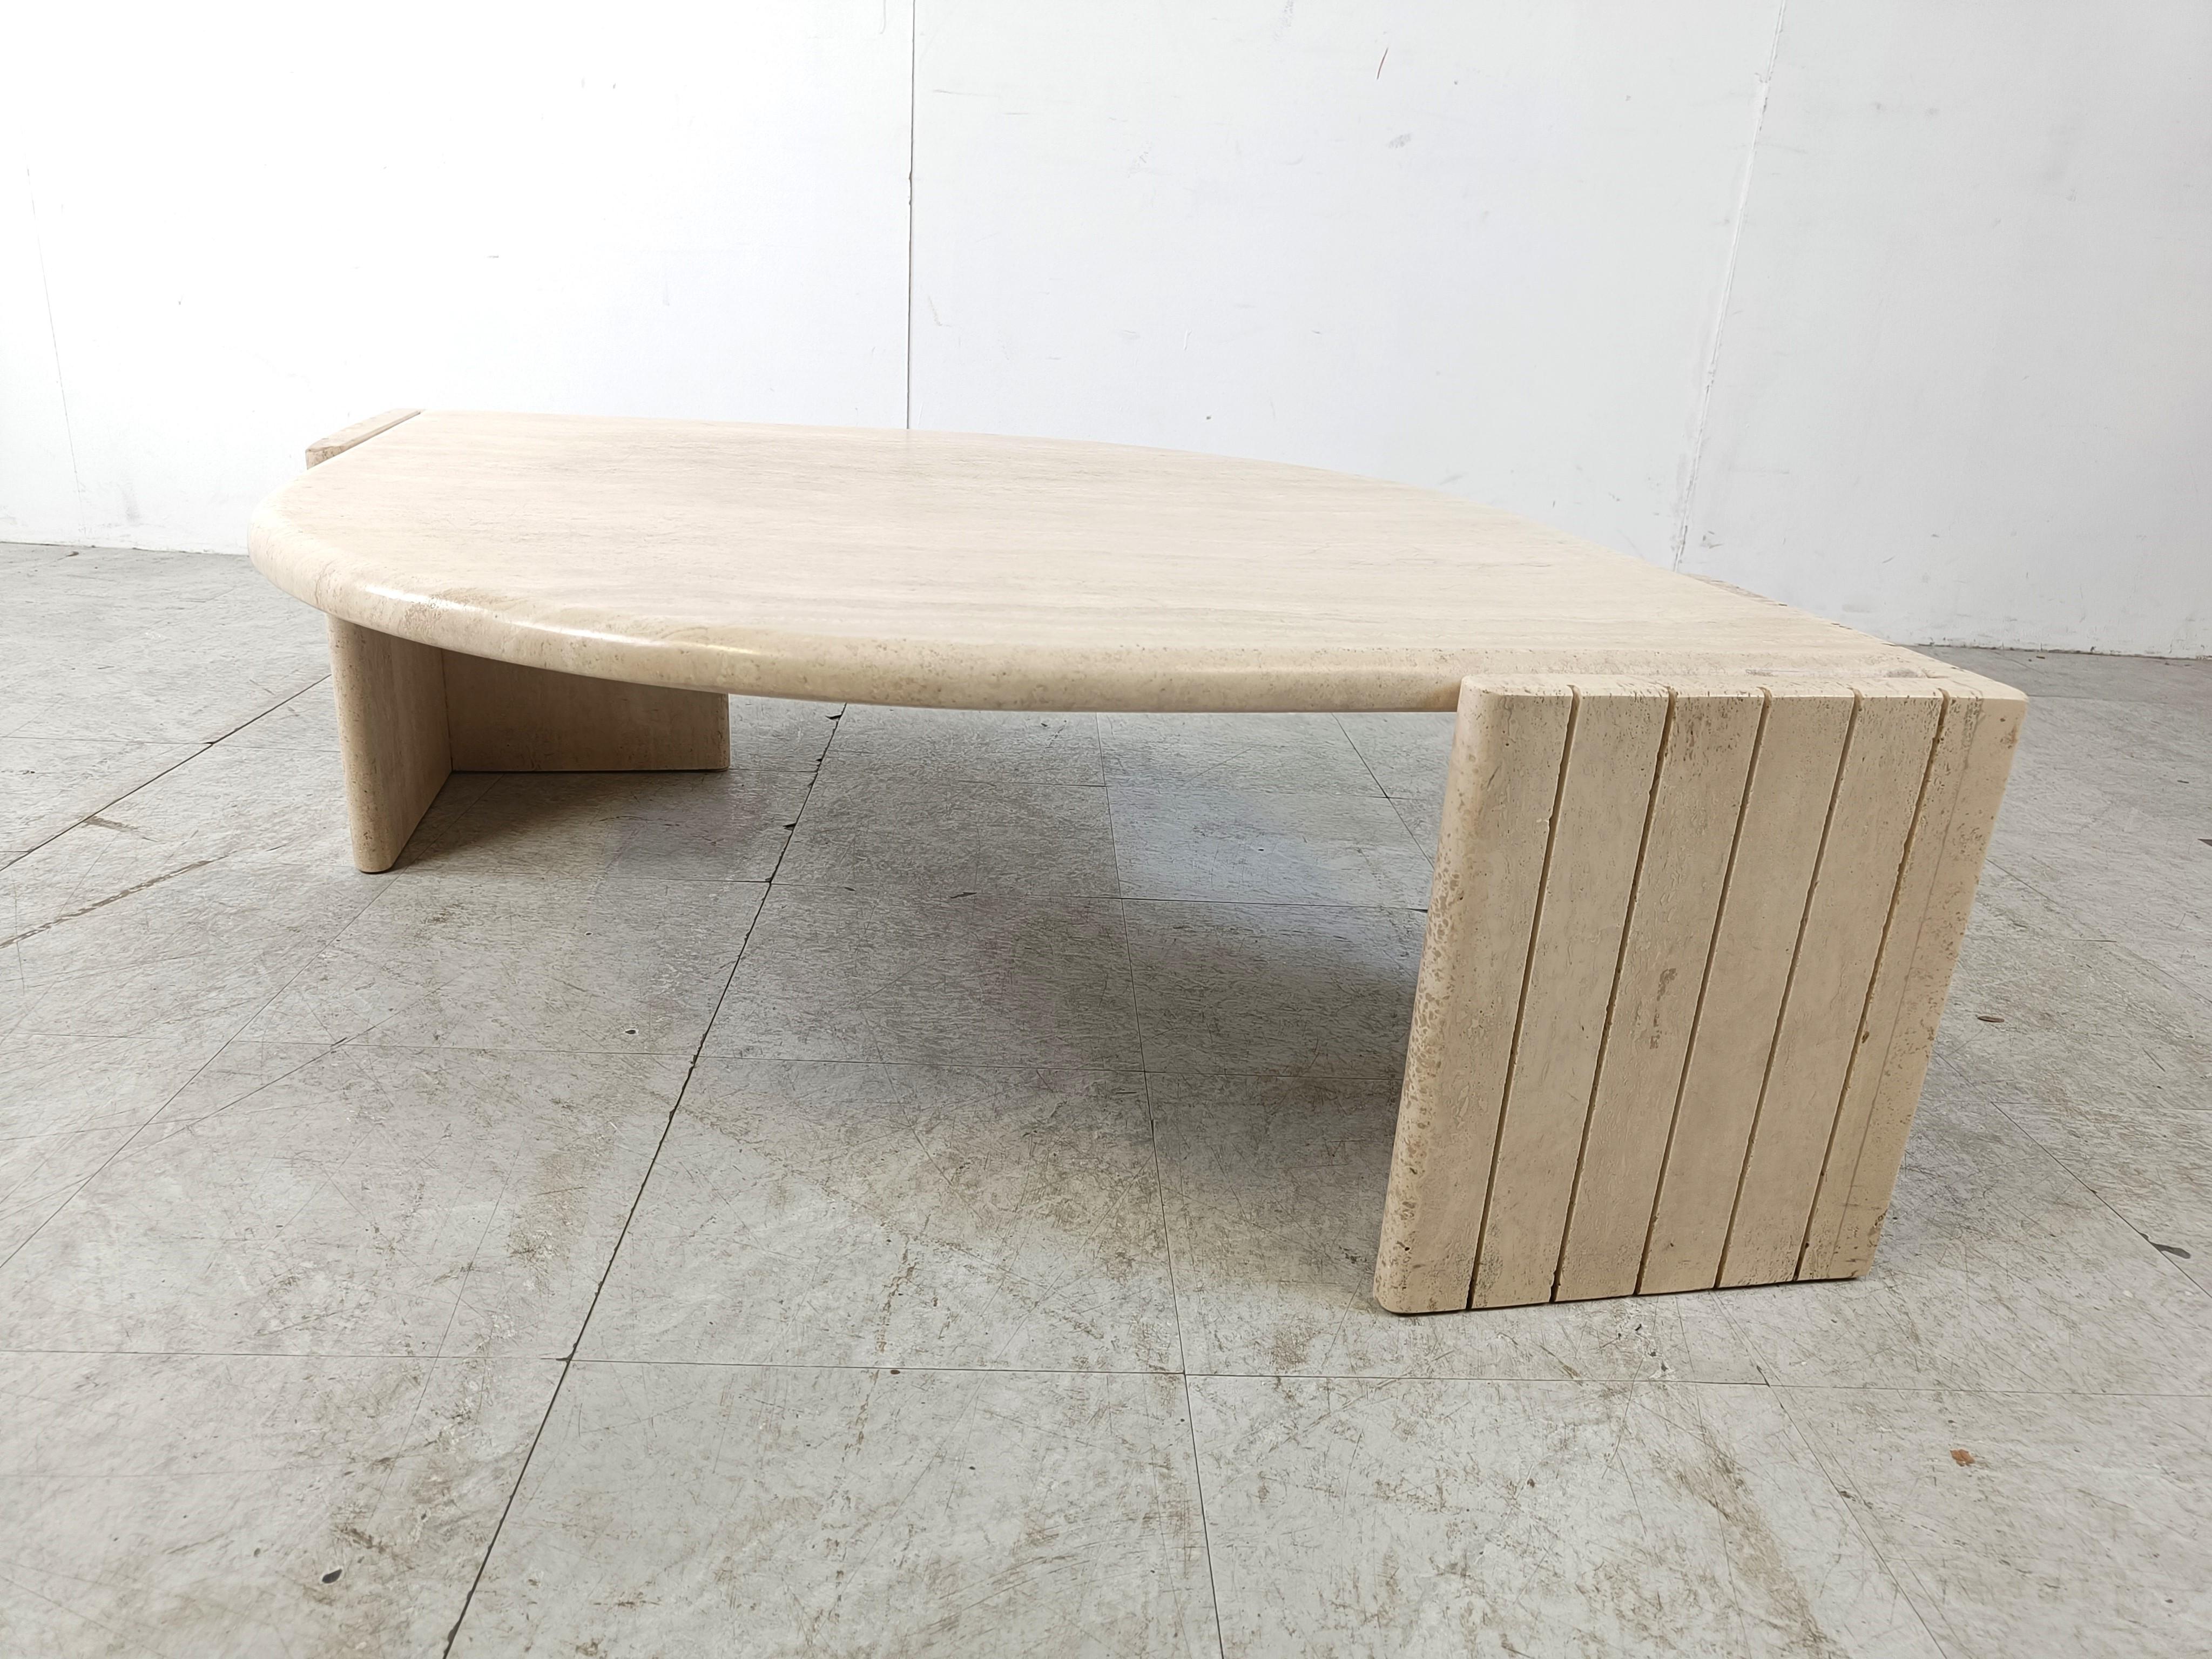 Gorgeous travertine 'eye' shaped coffee table by Roche Bobois.

These tables have been popular thanks to their curved and timeless design.

Good condition

1970s - France

Height: 37cm
Width: 135cm
Depth: 90cm

Ref.: 302102